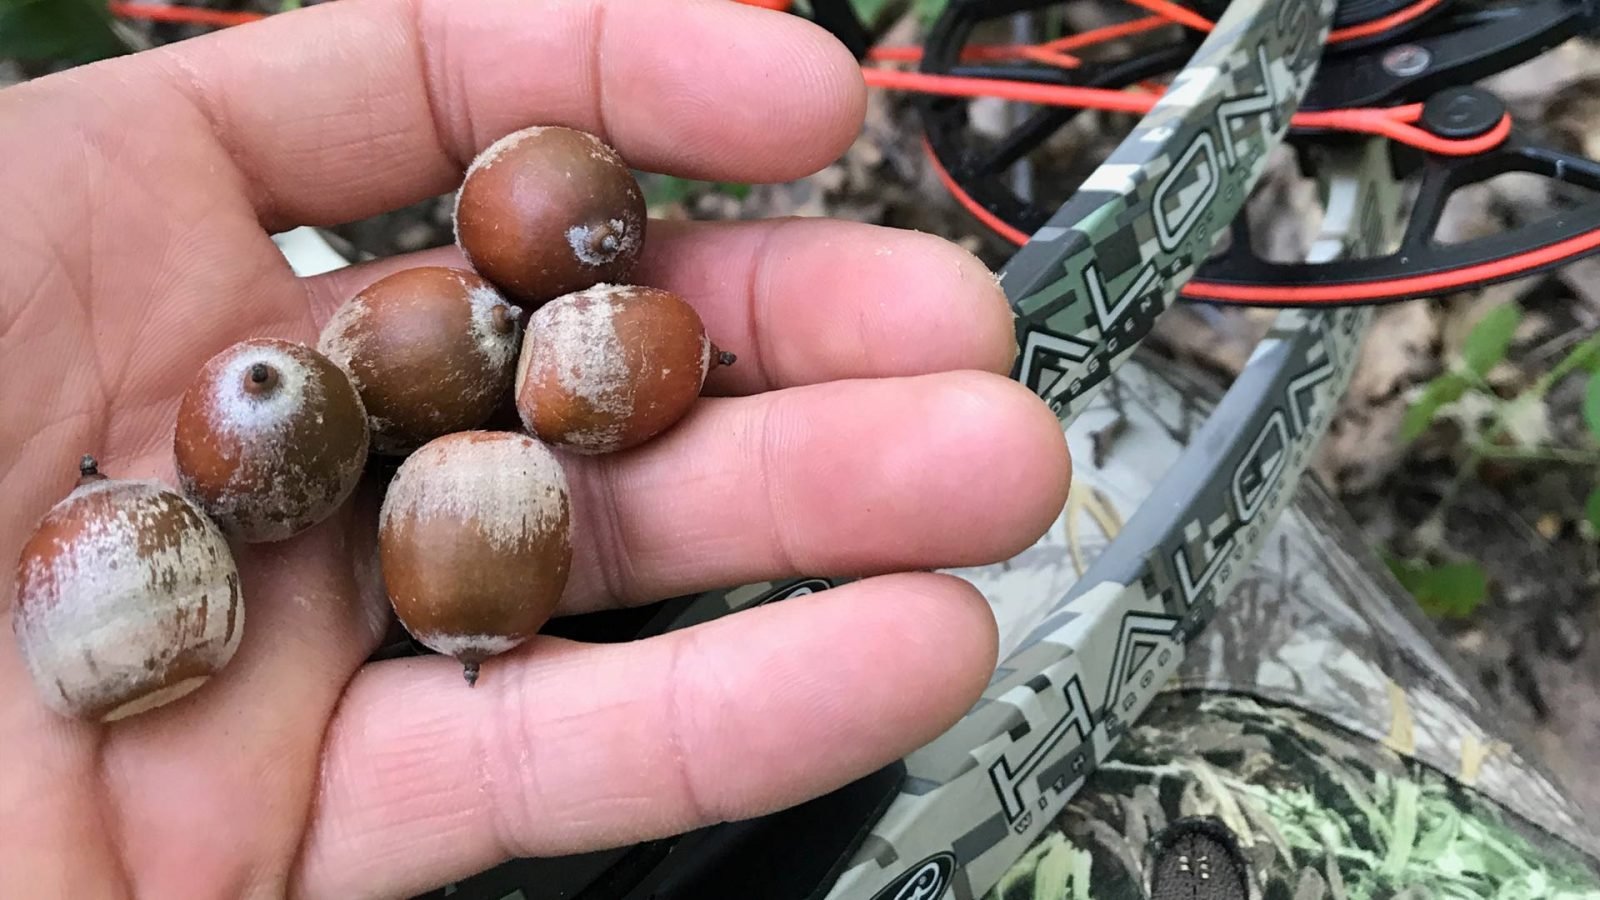 During years when the acorns are falling heavily, they factor into any early season strategy.  Deer will forego most every other kind of food source to eat acorns.